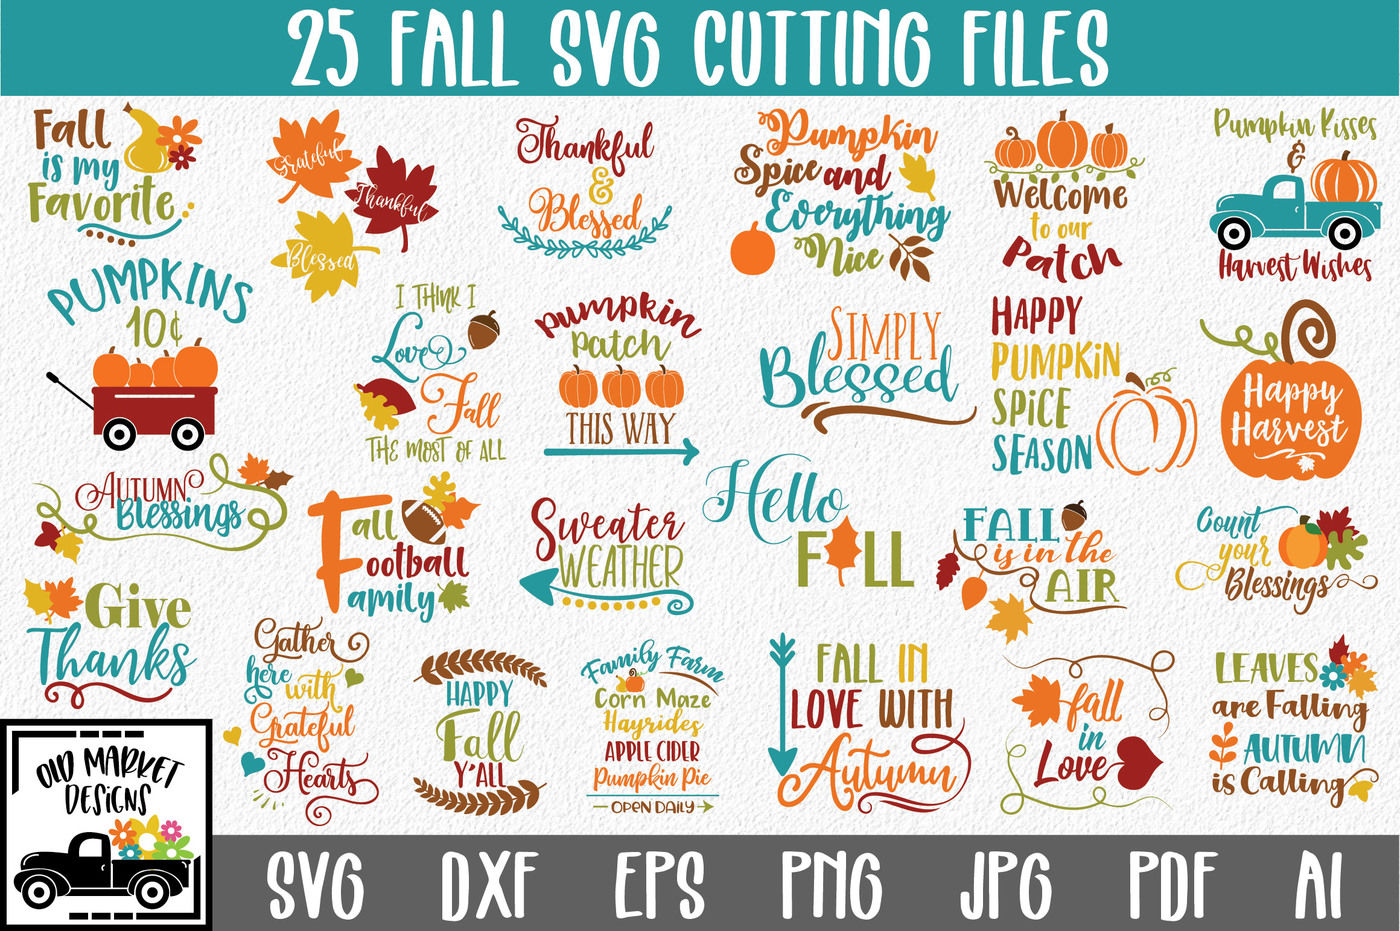 Download Fall SVG Bundle with 25 SVG PNG DXF EPS AI JpG Cut Files By Shannon Keyser | TheHungryJPEG.com